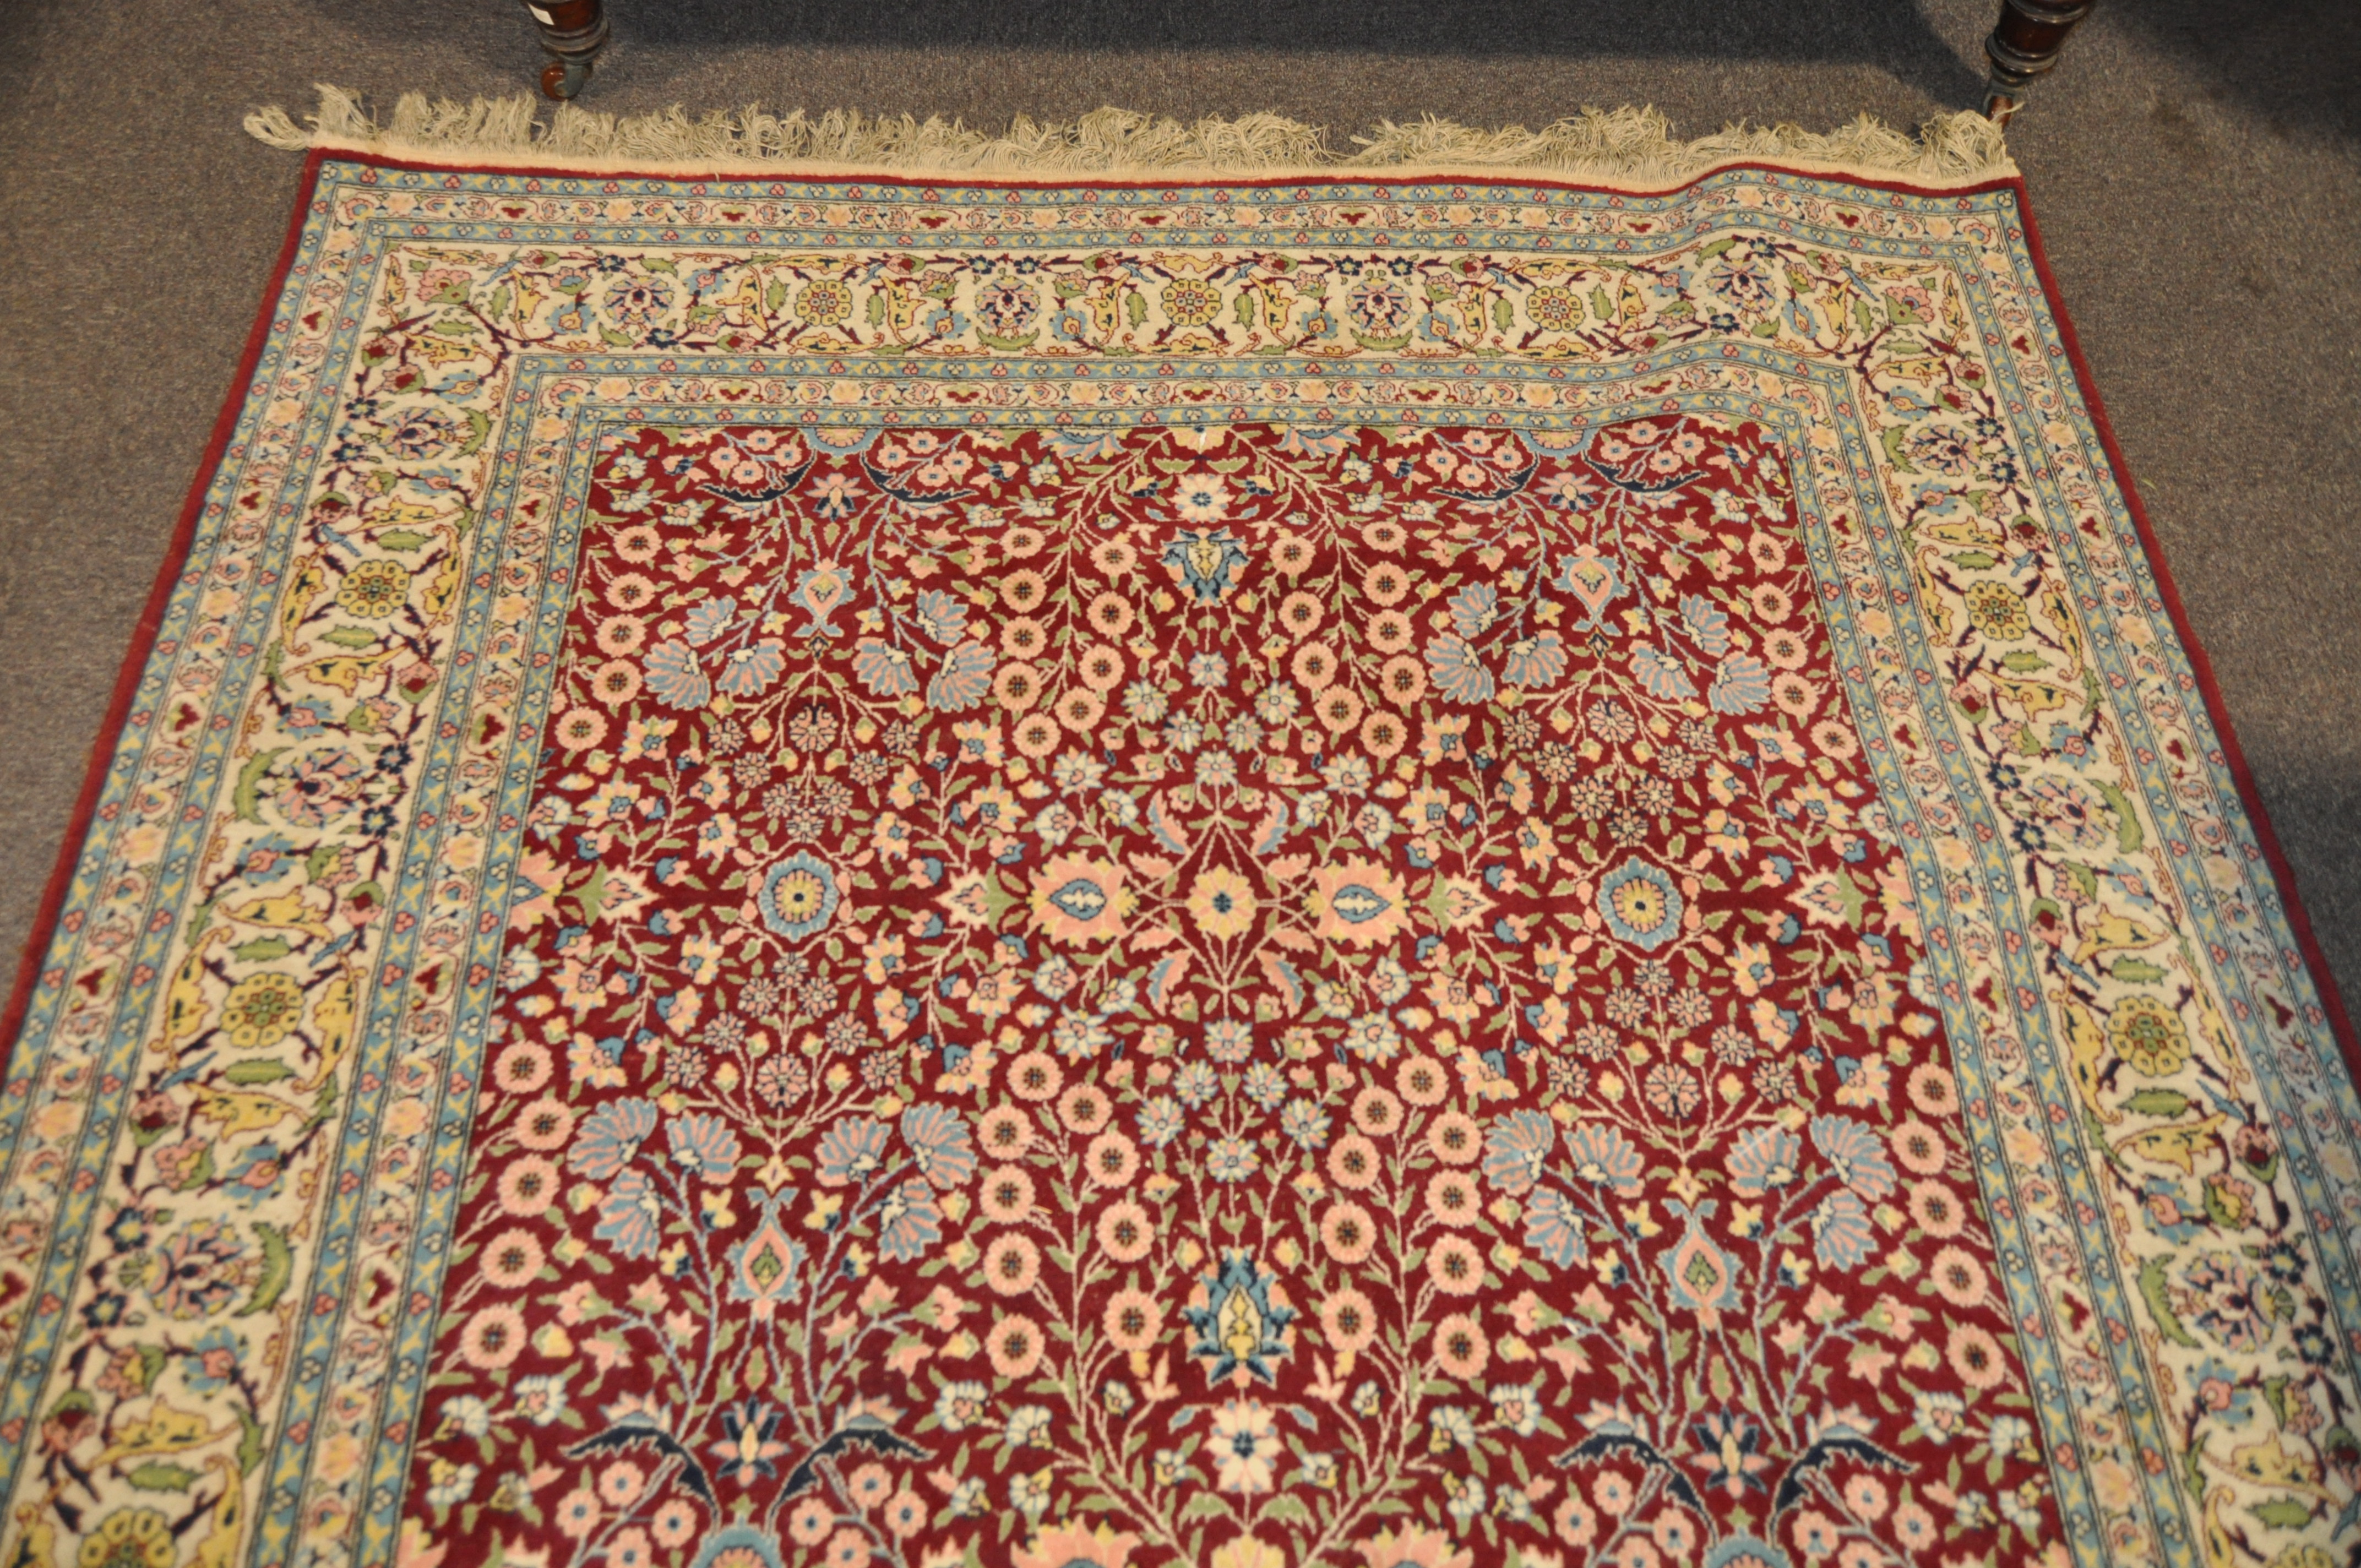 A 20th century Turkish rug, woven with dense flowers on a dark red ground, - Image 6 of 7